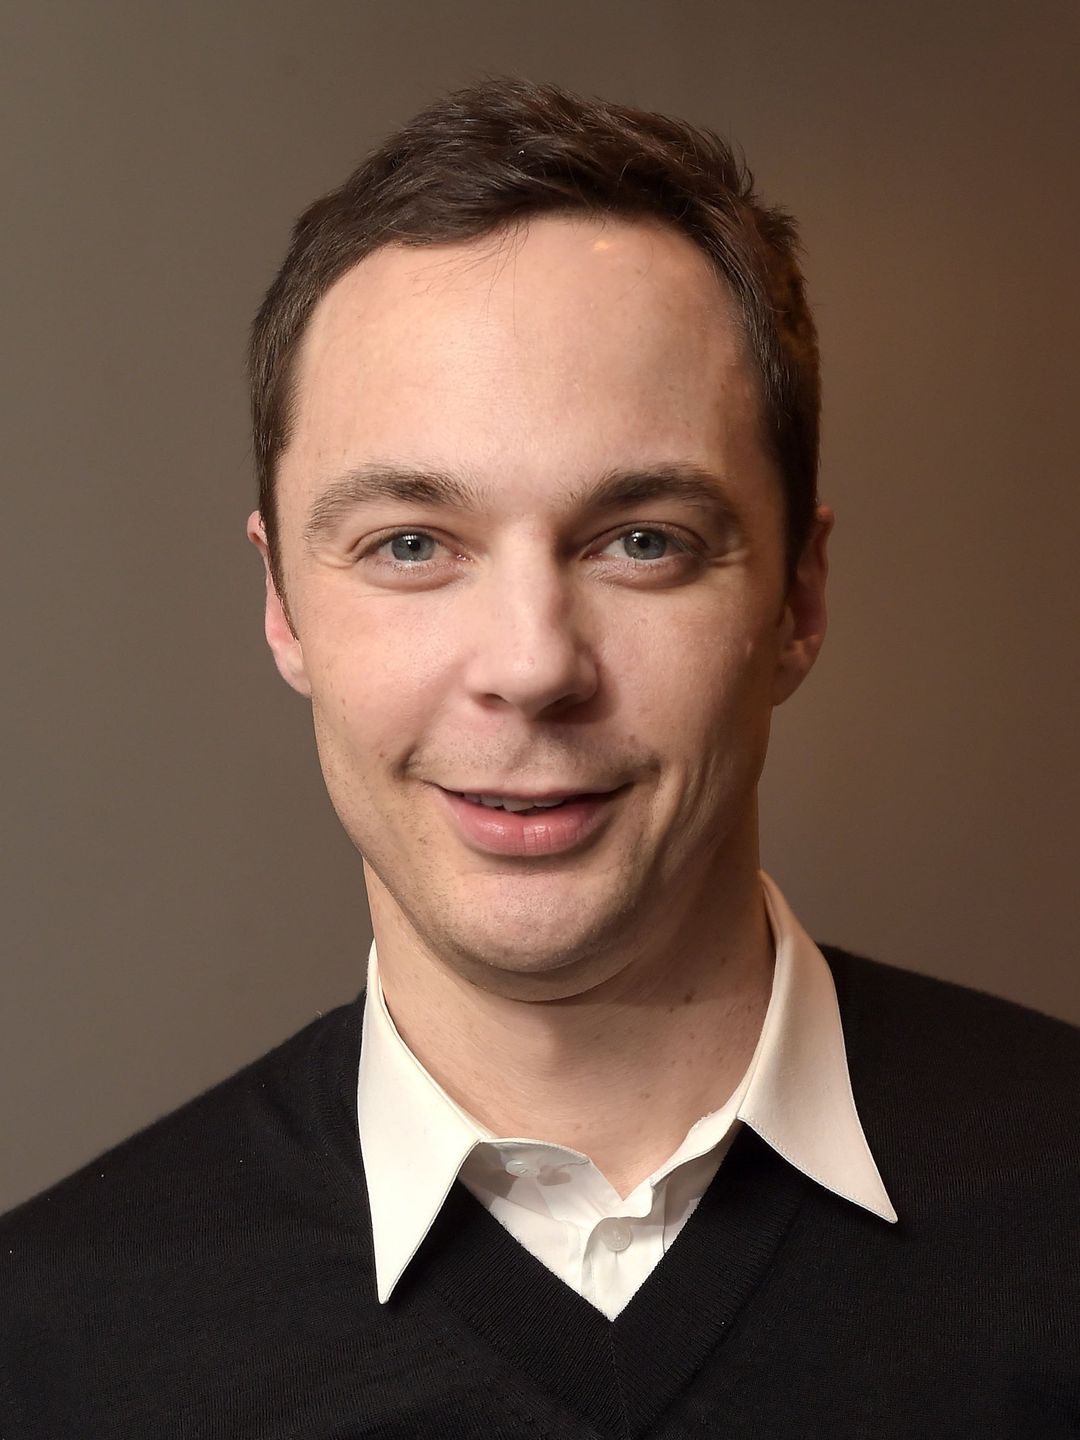 Jim Parsons does he have kids